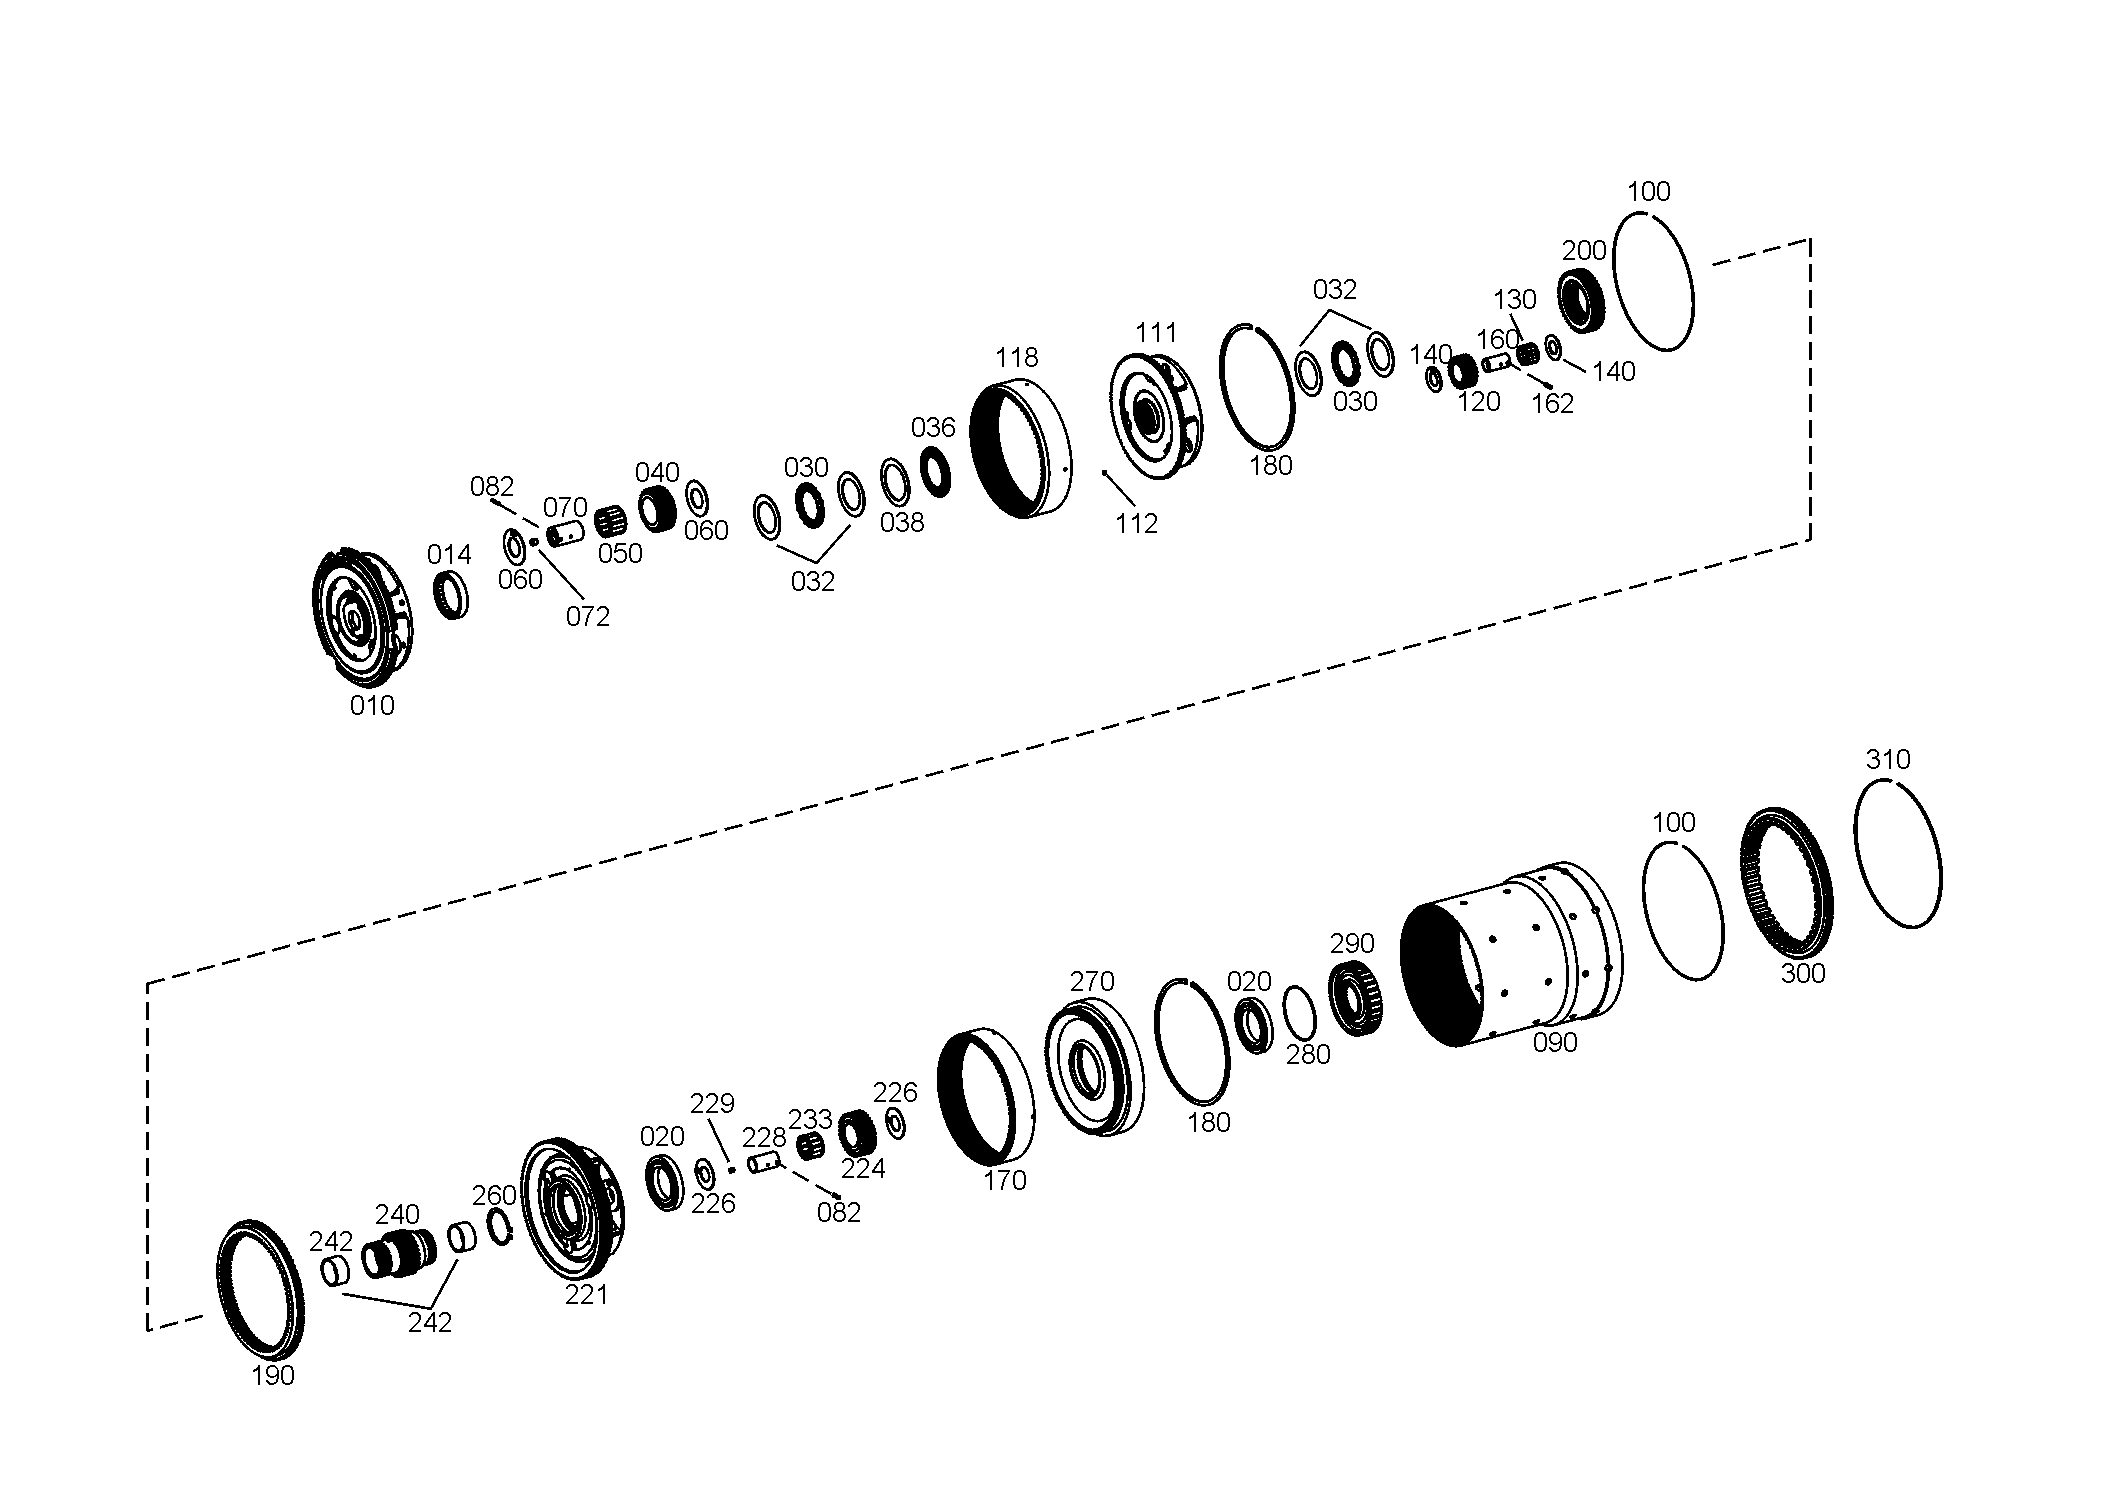 drawing for BEISSBARTH & MUELLER GMBH & CO. 09397960 - BALL BEARING (figure 3)